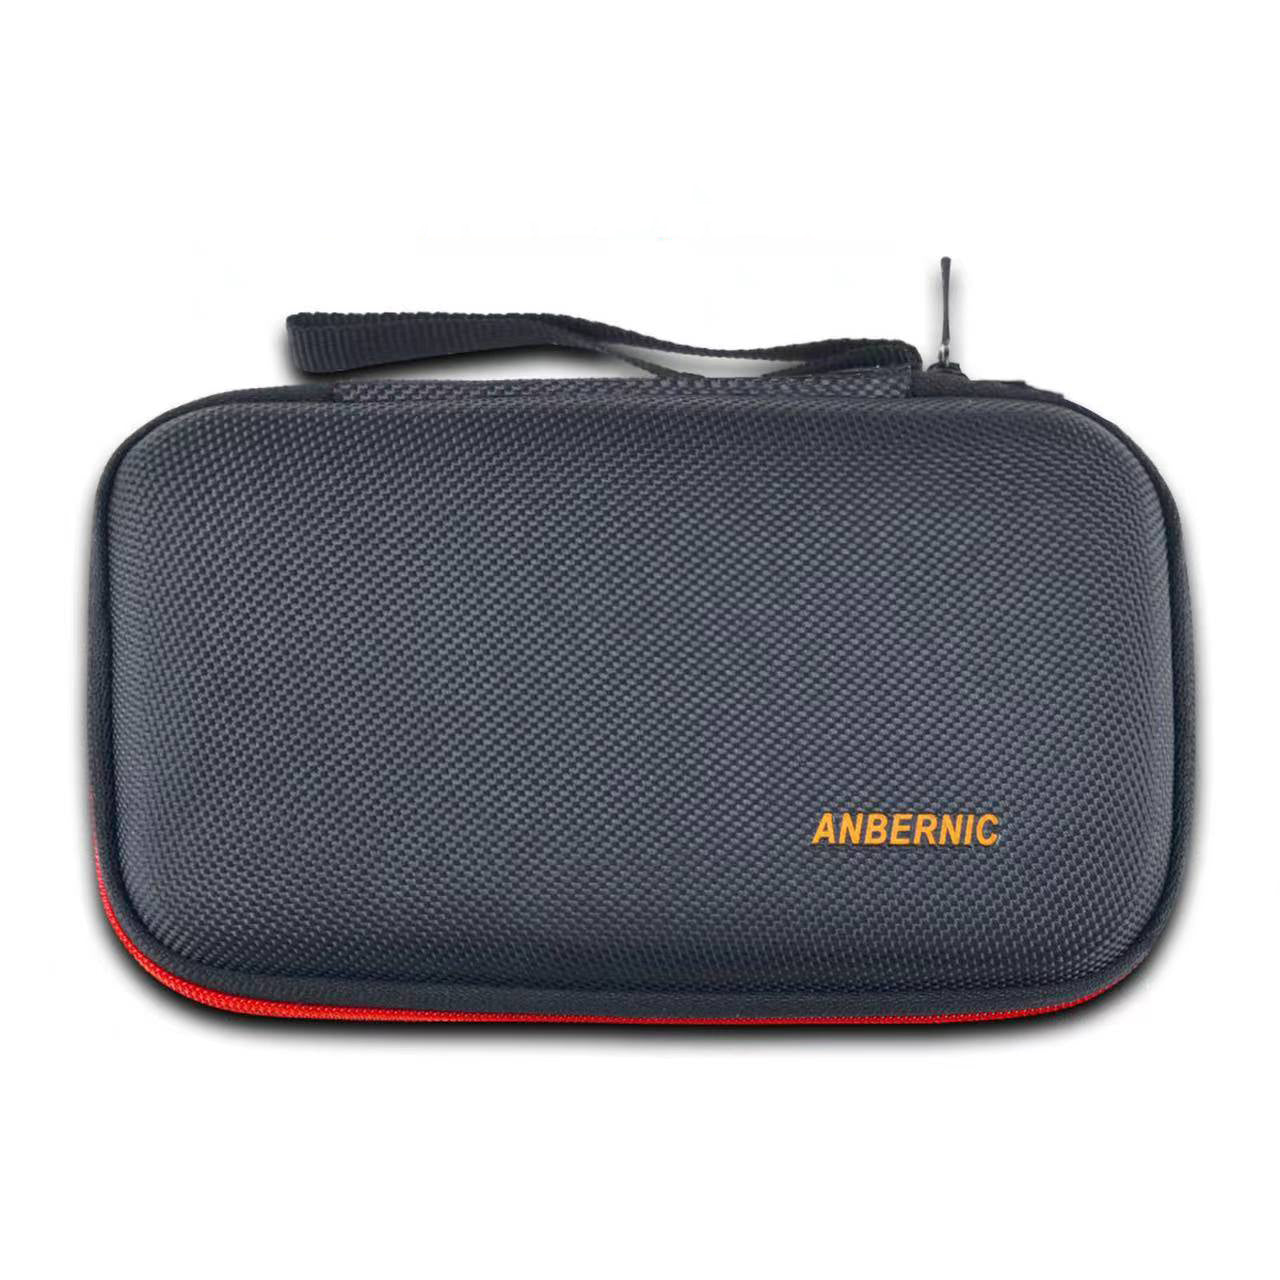 ANBERNIC RG350/RG350M/RG350P Protection Bag and parts for Retro Game Console Game Player RG351P Handheld Retro Game Console BAG and parts ship from china